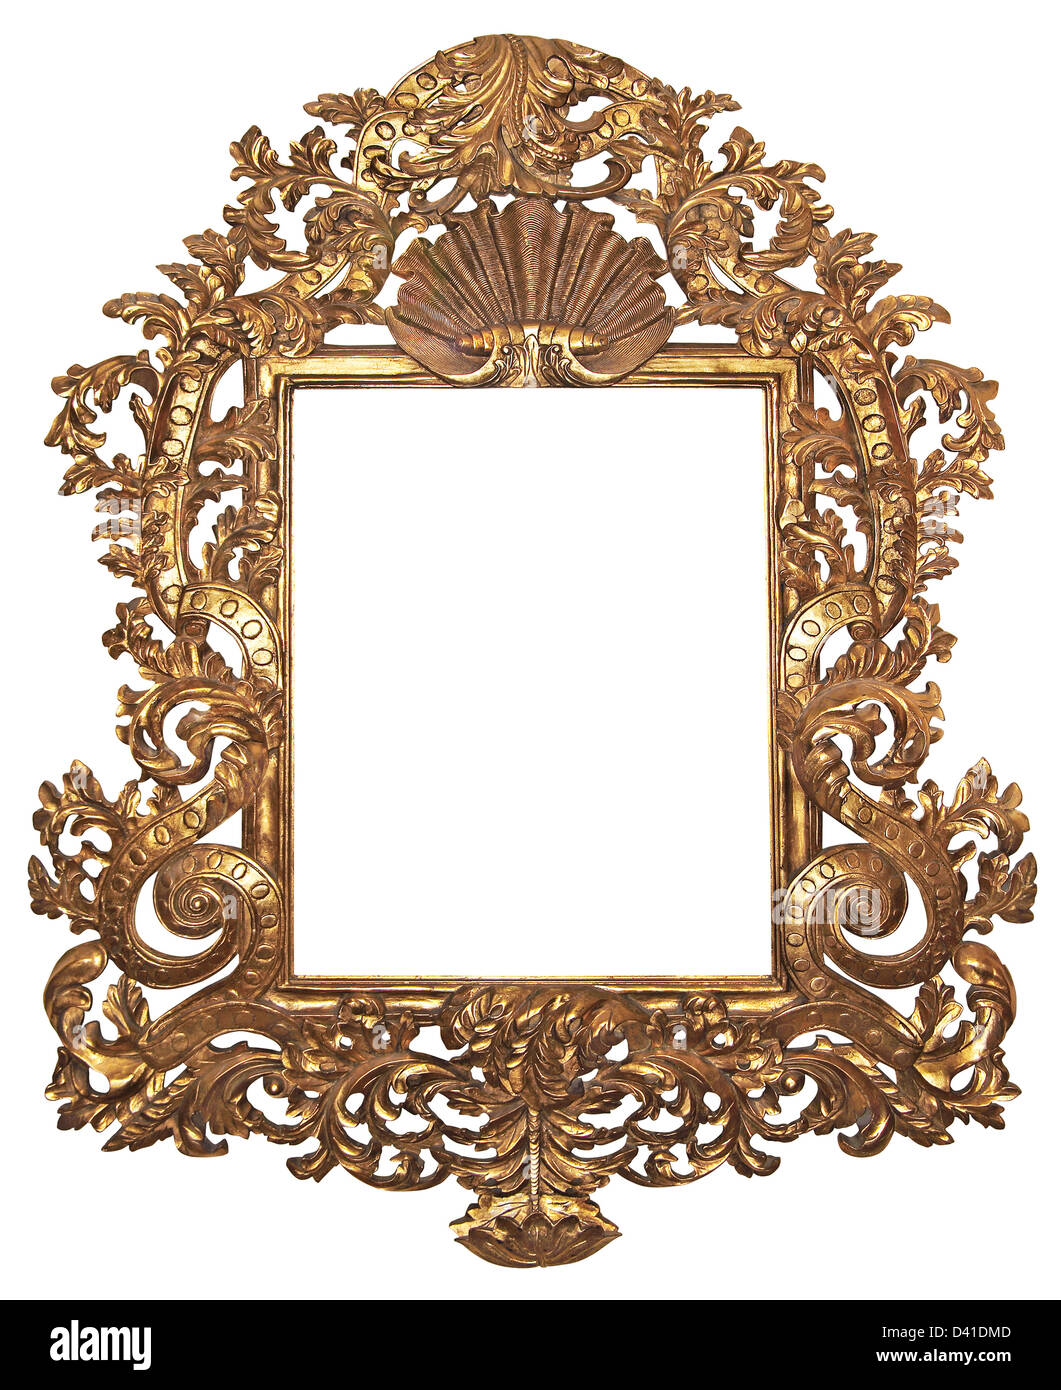 Old gilded wooden frame for mirrors Stock Photo